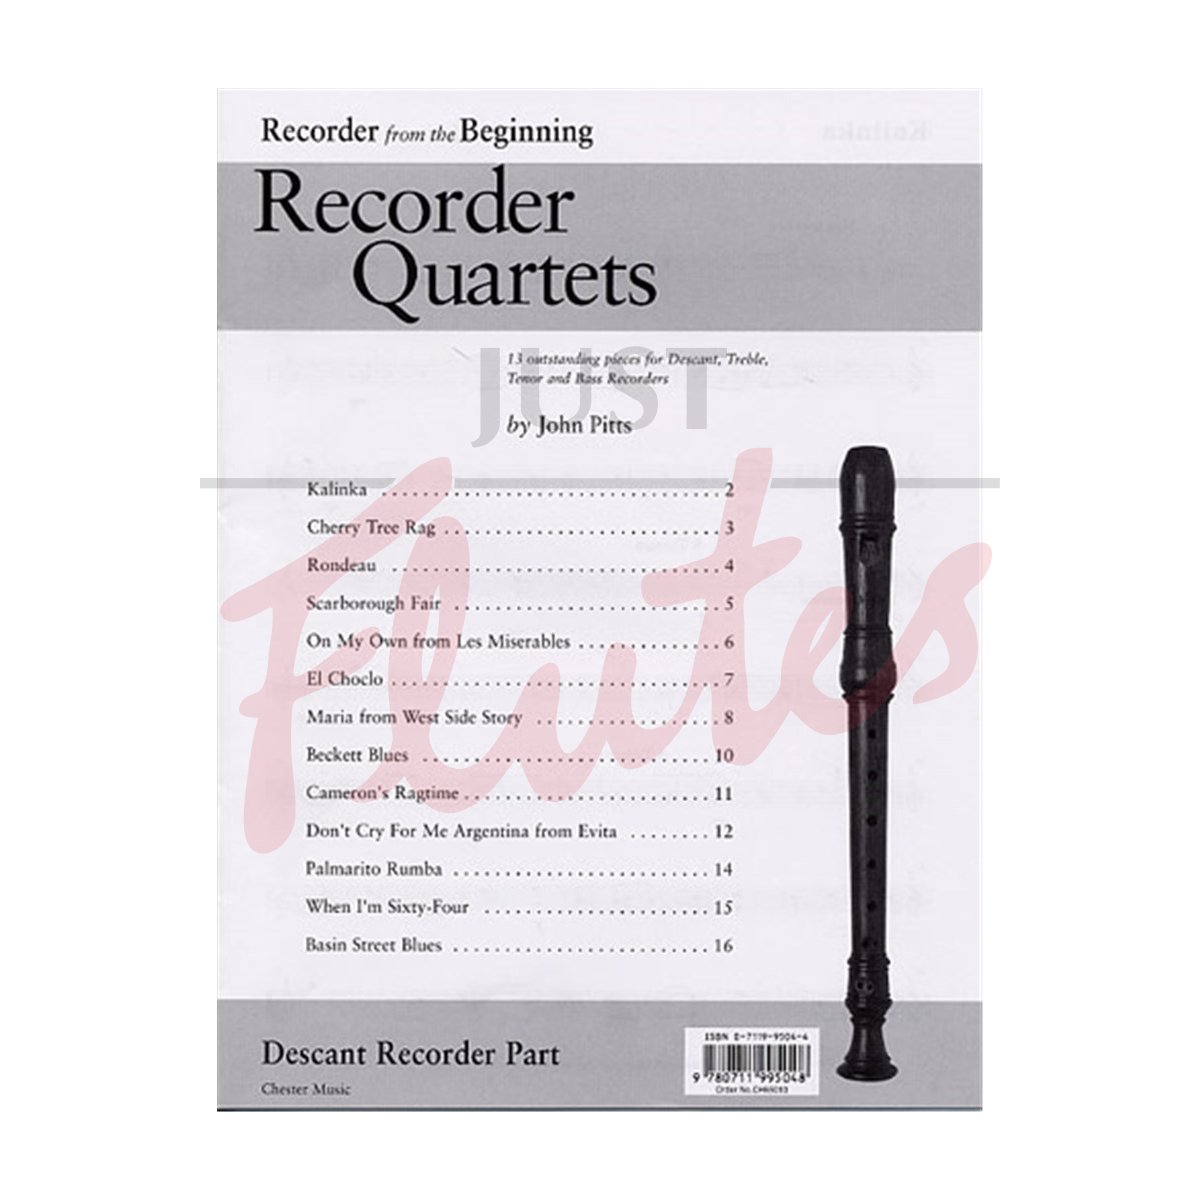 Recorder from the Beginning: Recorder Quartets, Descant Recorder Part